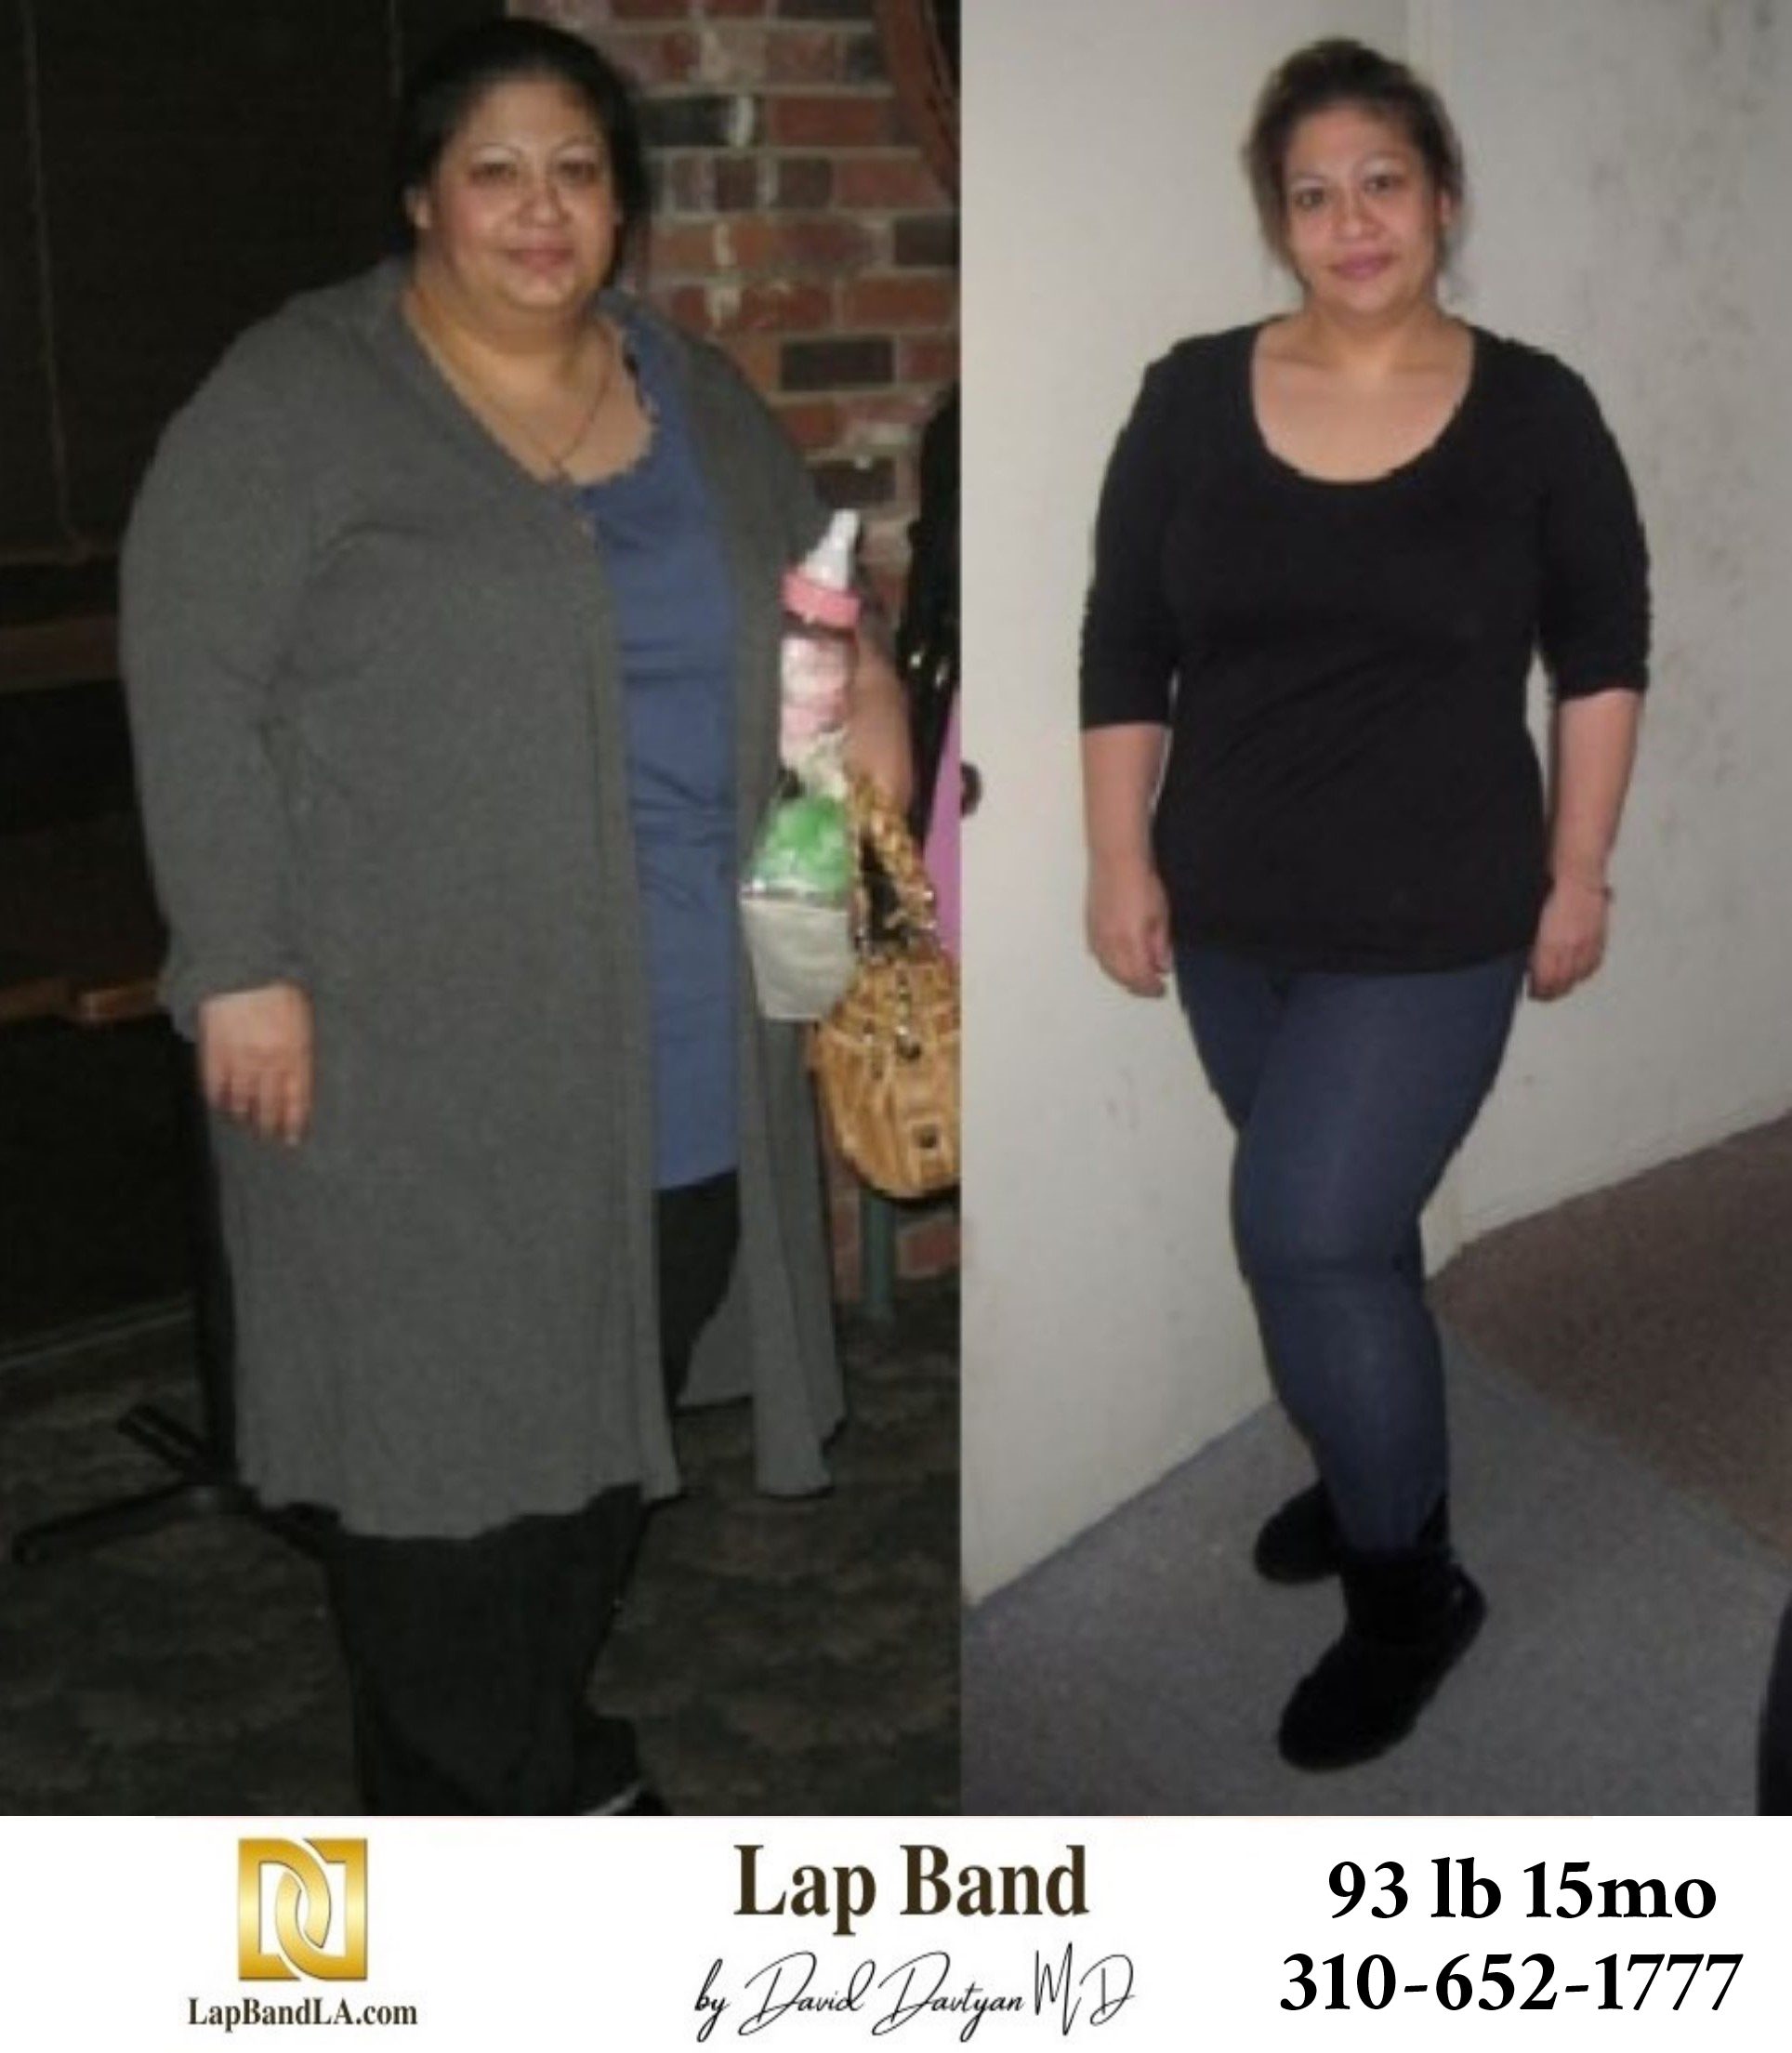 Anita S. Bariatric Surgery before and after los angeles